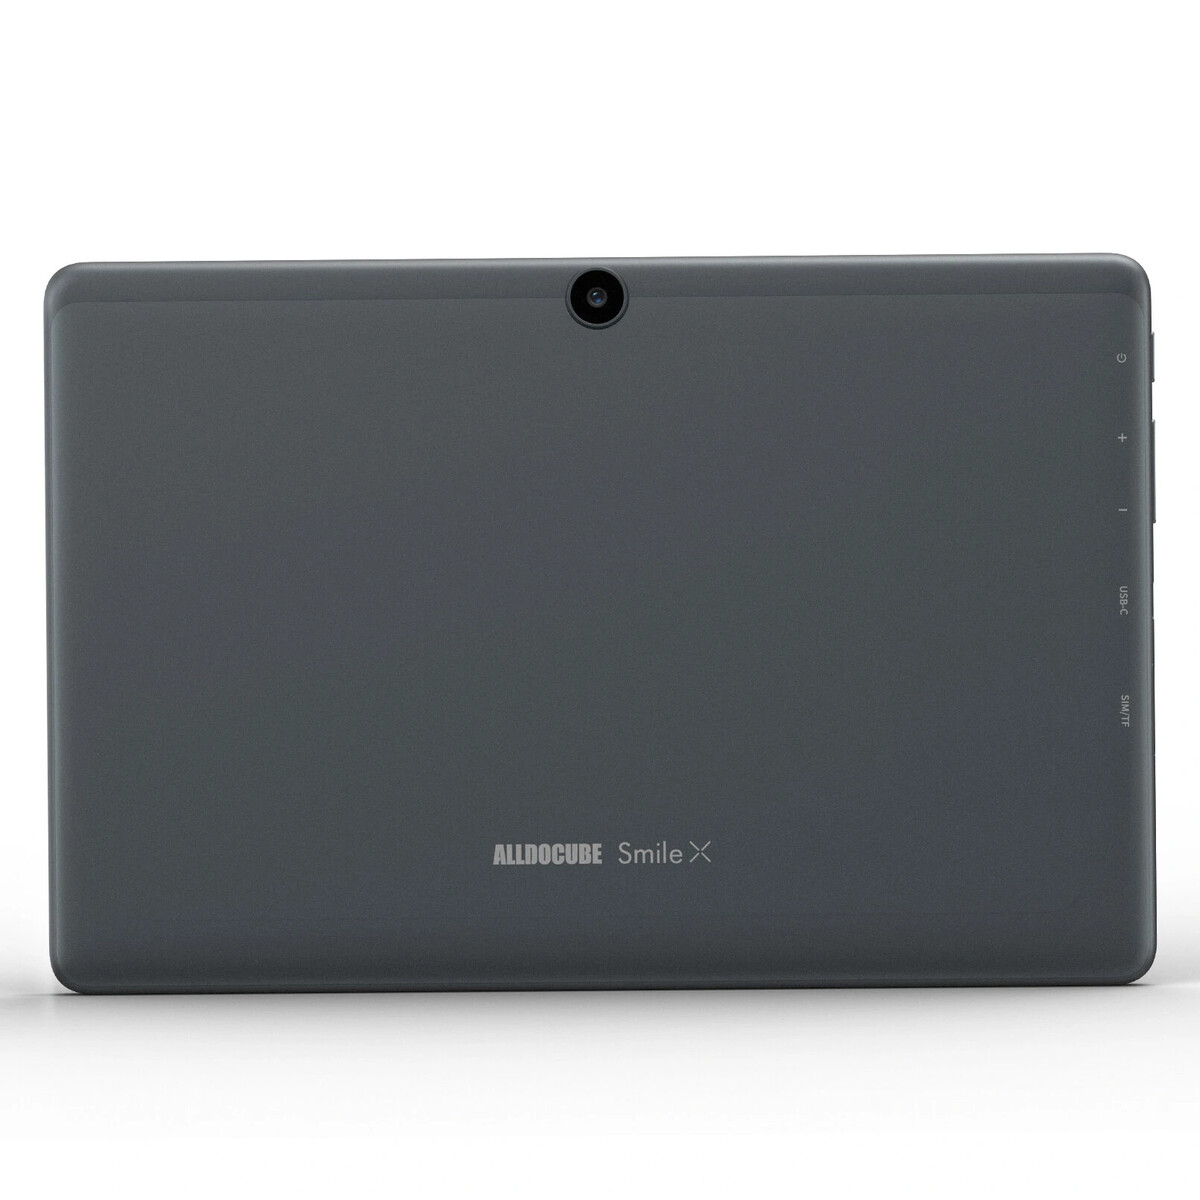 Alldocube Smile X: Budget tablet launched for US$149.99 with a 